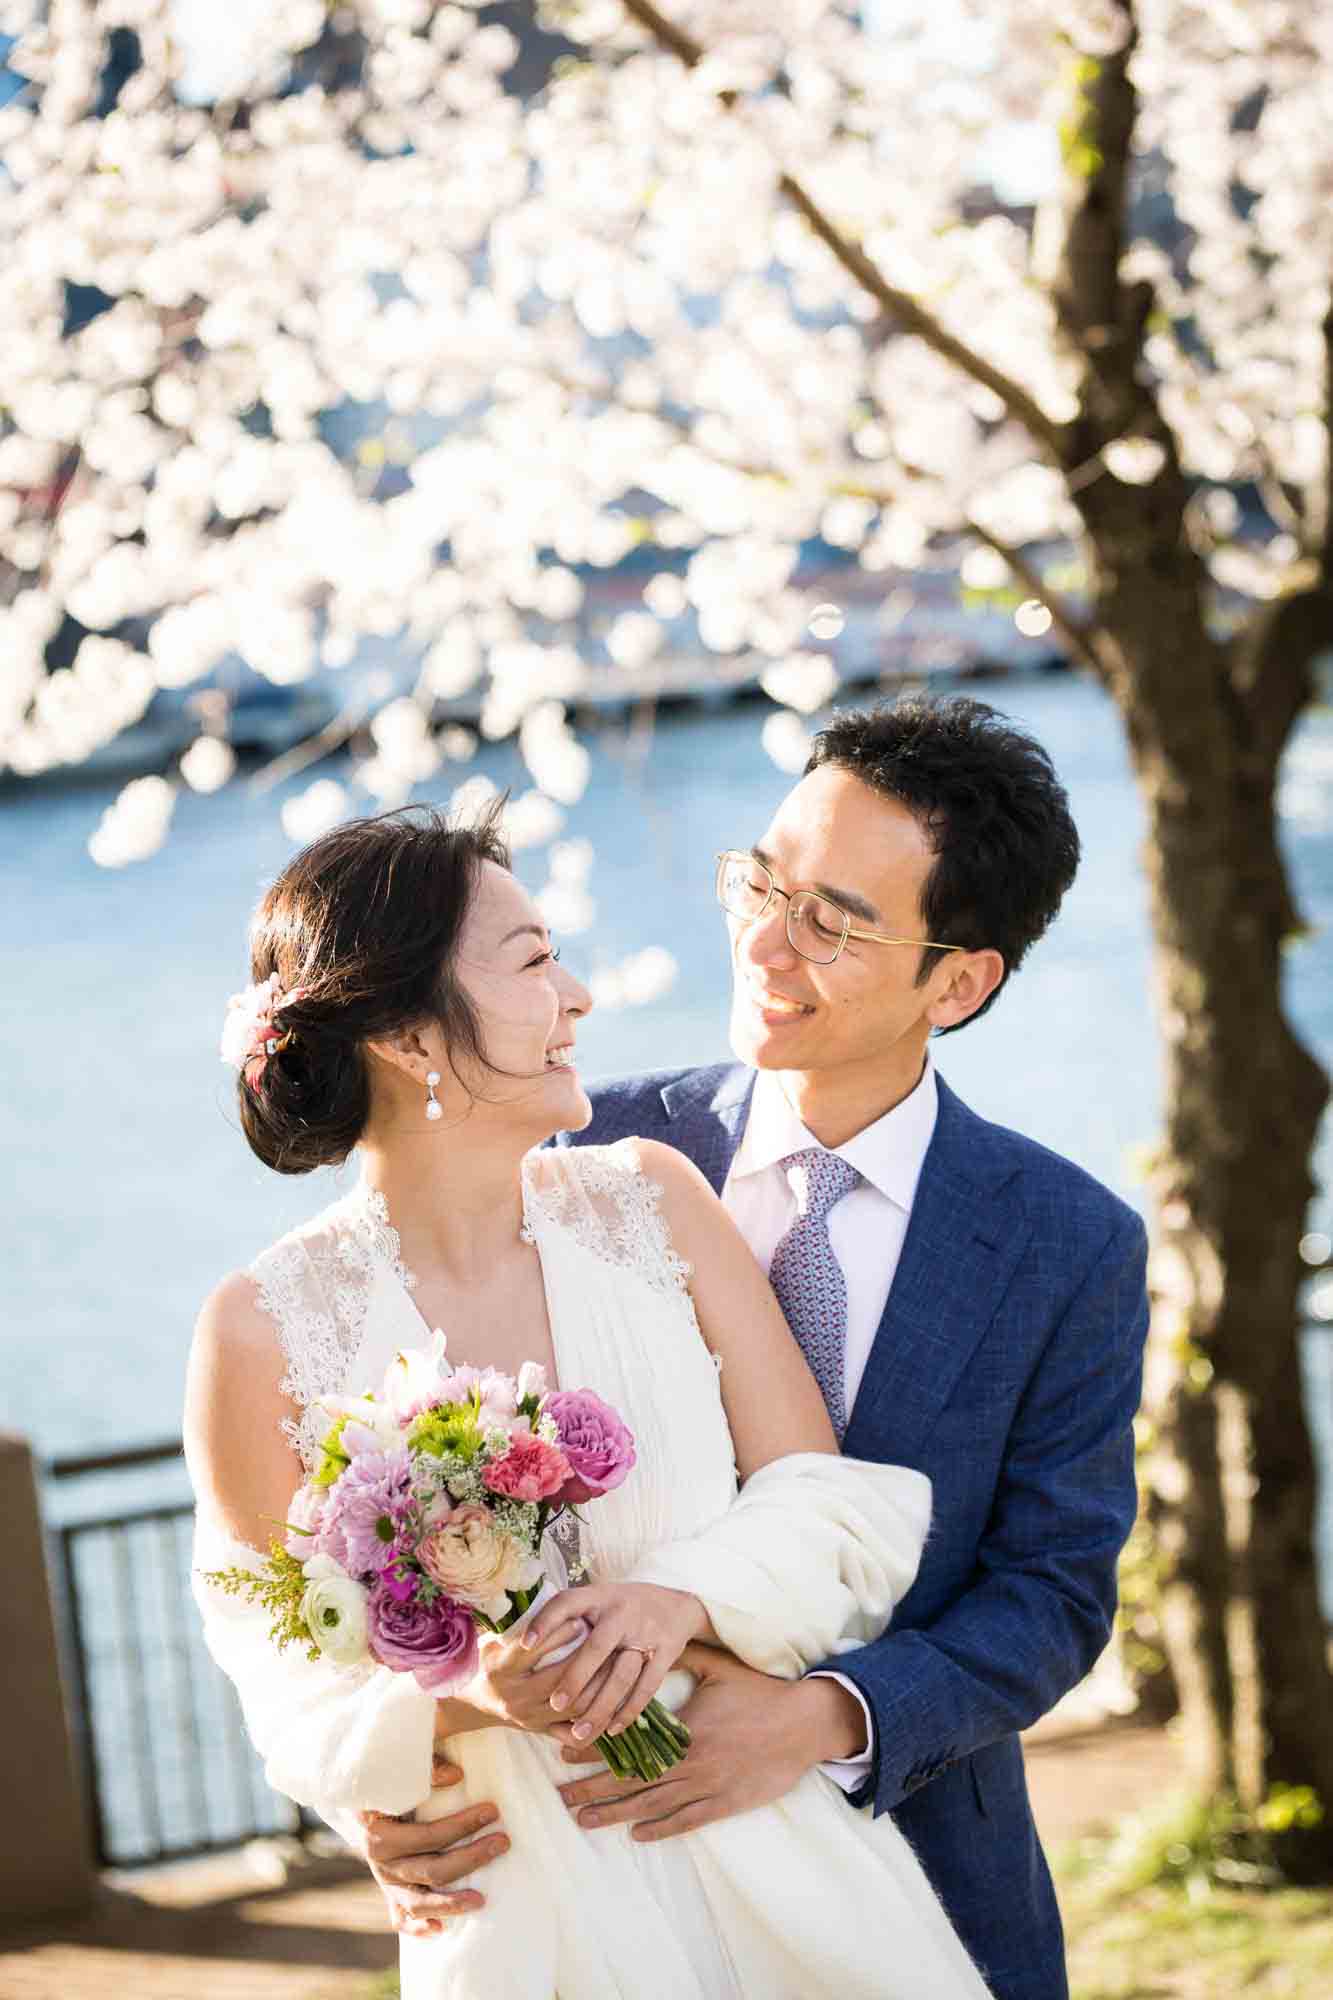 Couple hugging in front of cherry blossom trees and waterfront during a Roosevelt Island engagement photo shoot